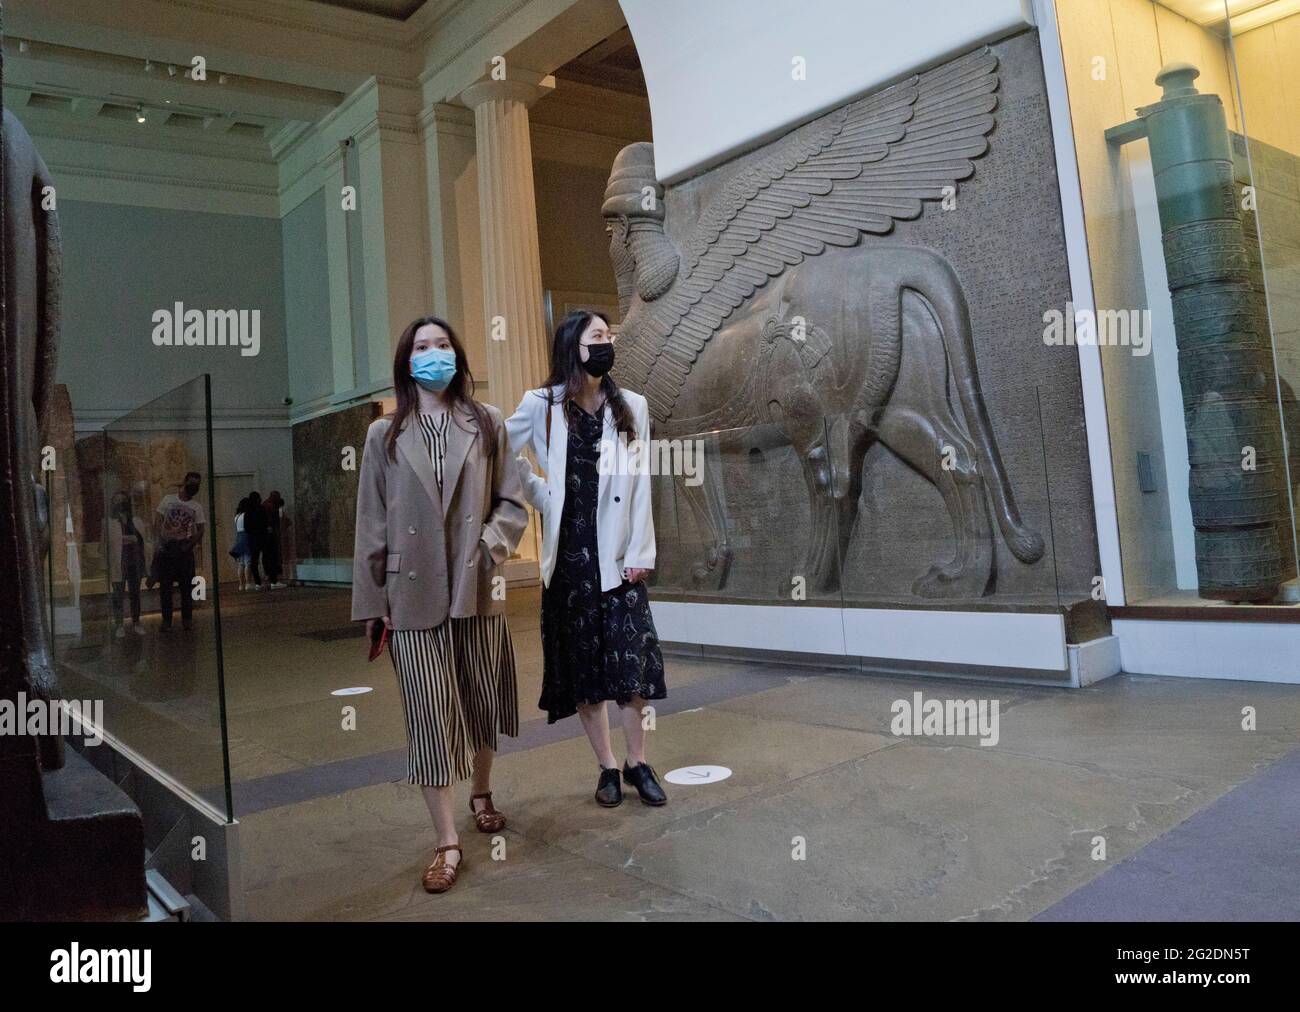 Visitors to the British Museum in London wearing masks due to the COVID-19 pandemic.  England, UK. Stock Photo